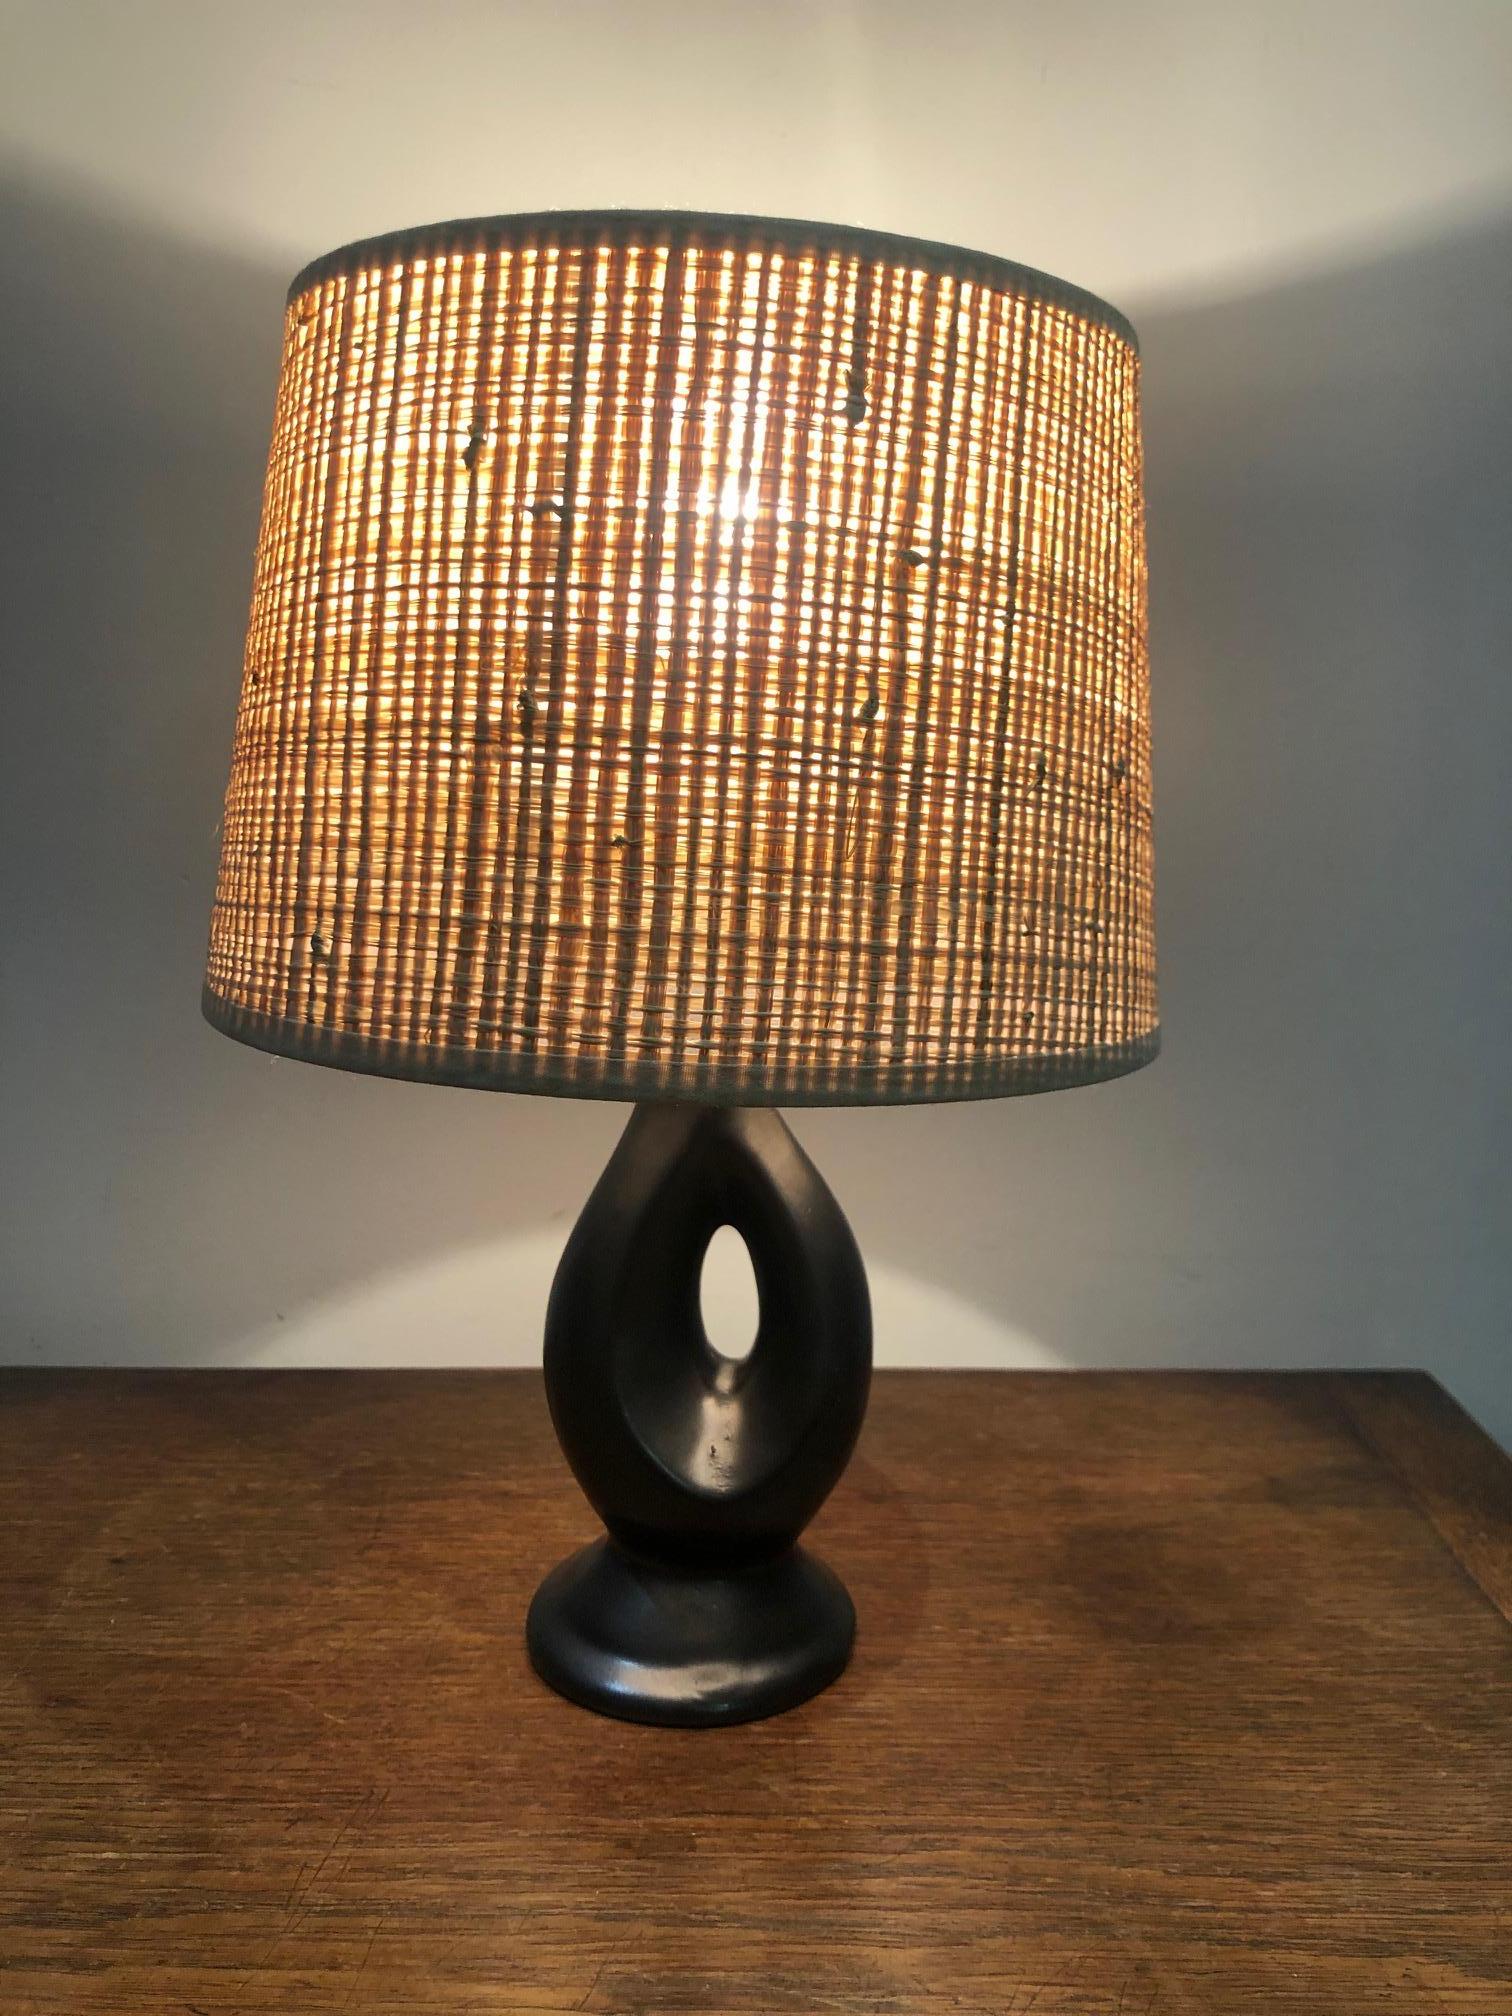 Ceramic lamp in the manner of Jouve circa 1950s in original condition
shade is contemporary.